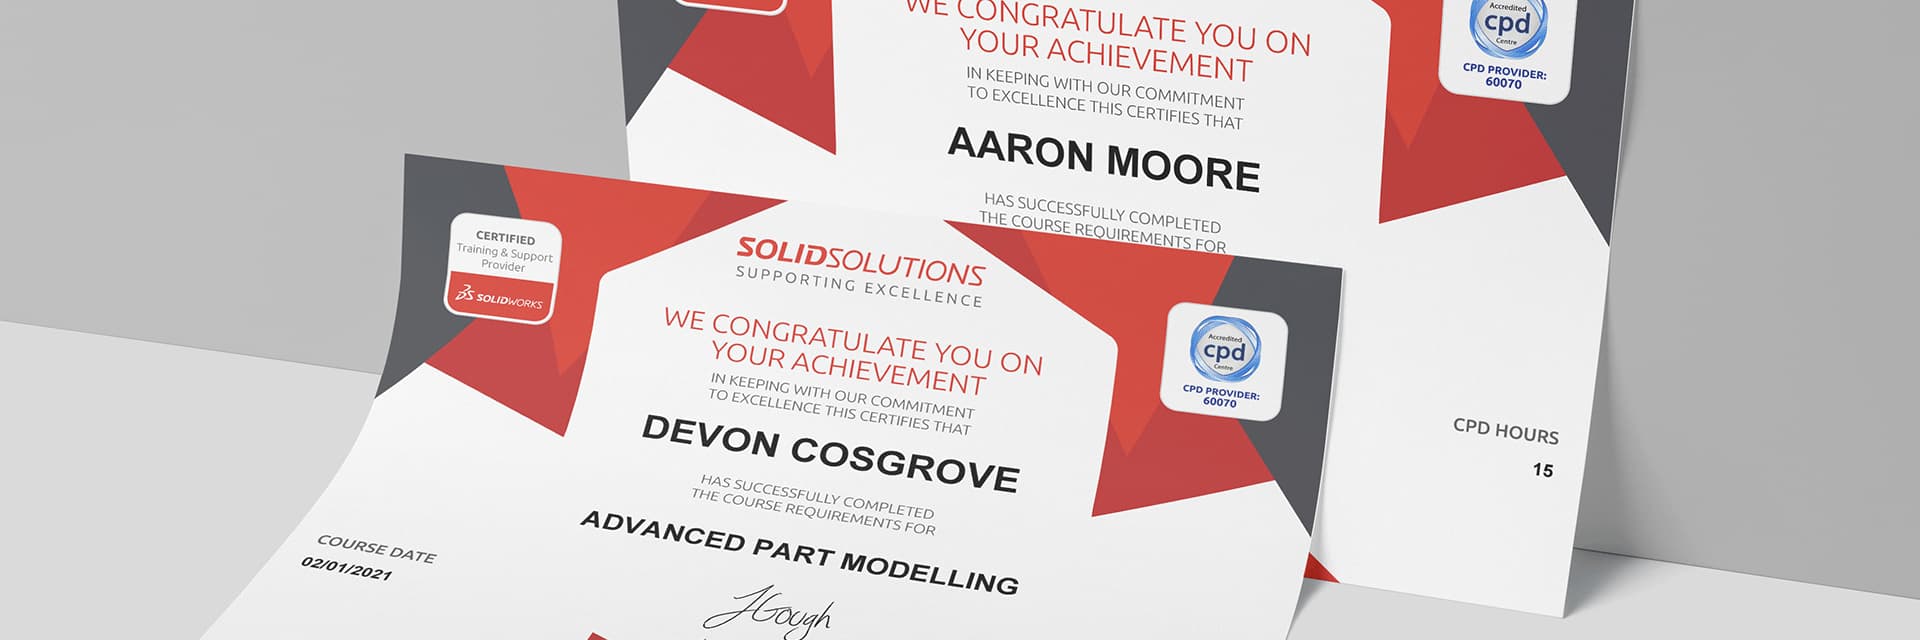 solidworks certification cost